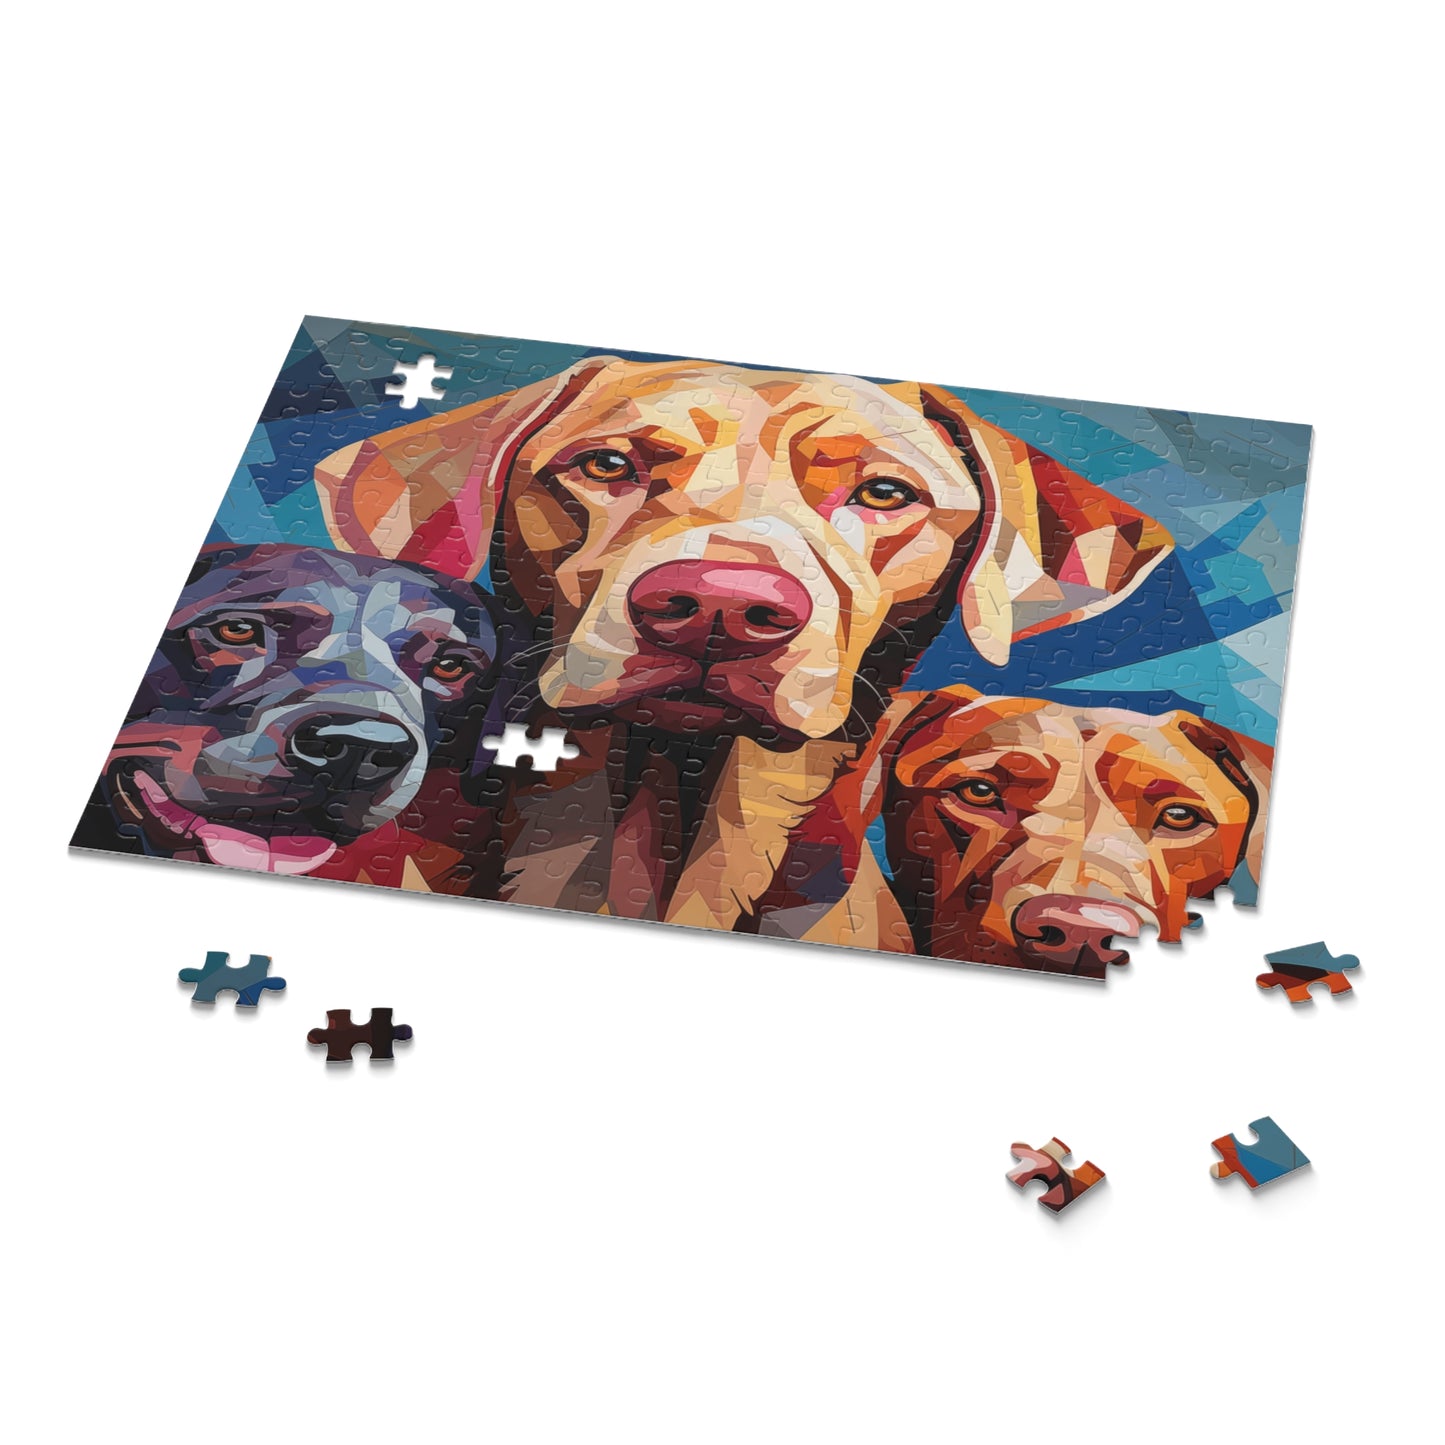 Labrador Dog Abstract Vibrant Jigsaw Puzzle for Boys, Girls, Kids Adult Birthday Business Jigsaw Puzzle Gift for Him Funny Humorous Indoor Outdoor Game Gift For Her Online-9